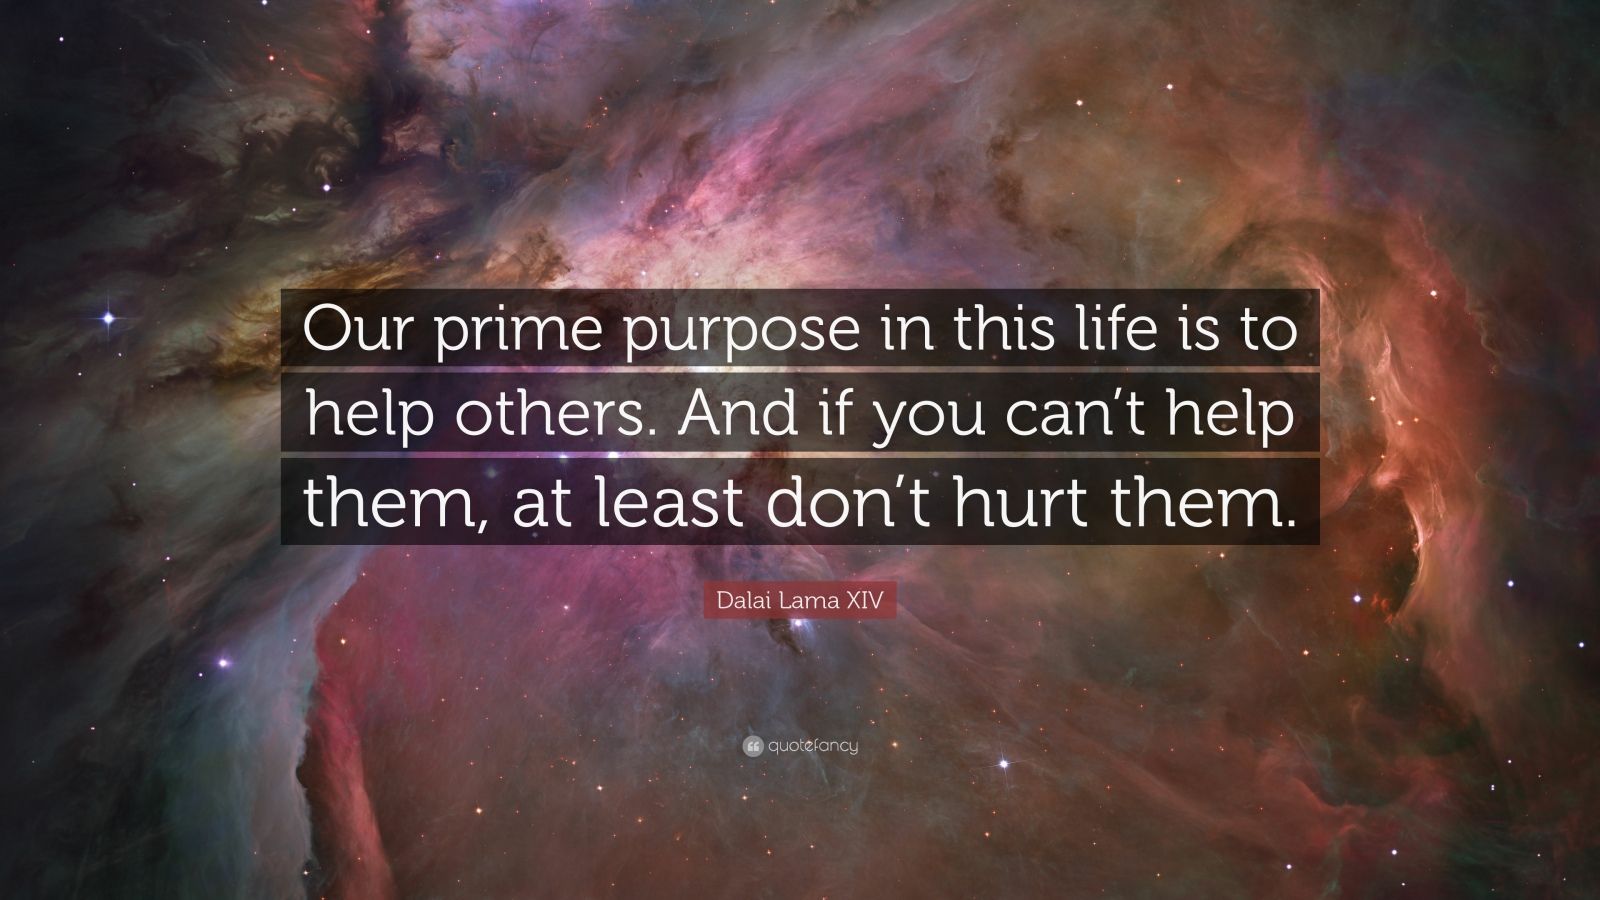 Dalai Lama XIV Quote: “Our prime purpose in this life is to help others